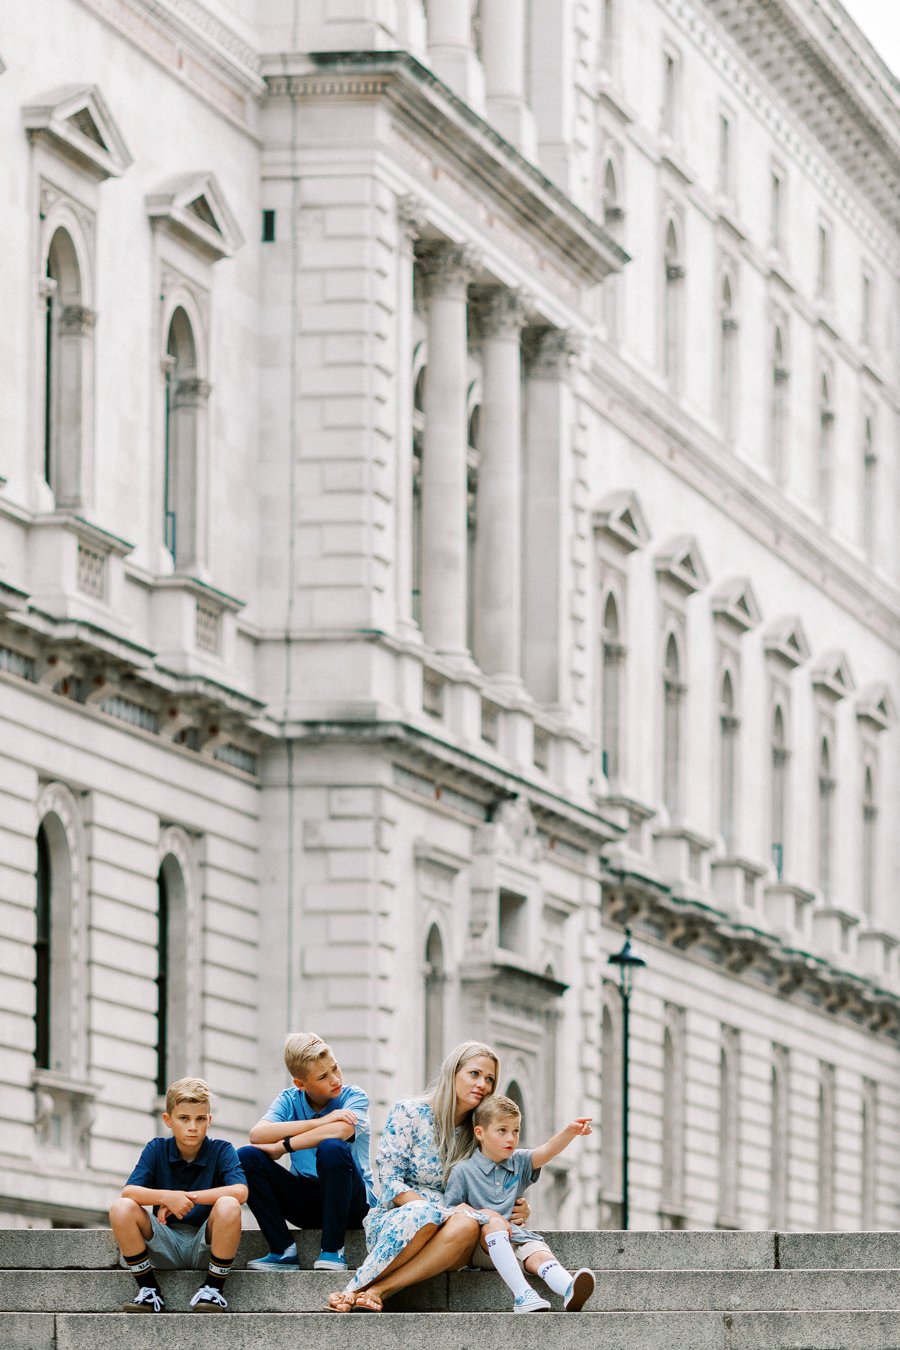  London family vacation photoshoot around Westminster 